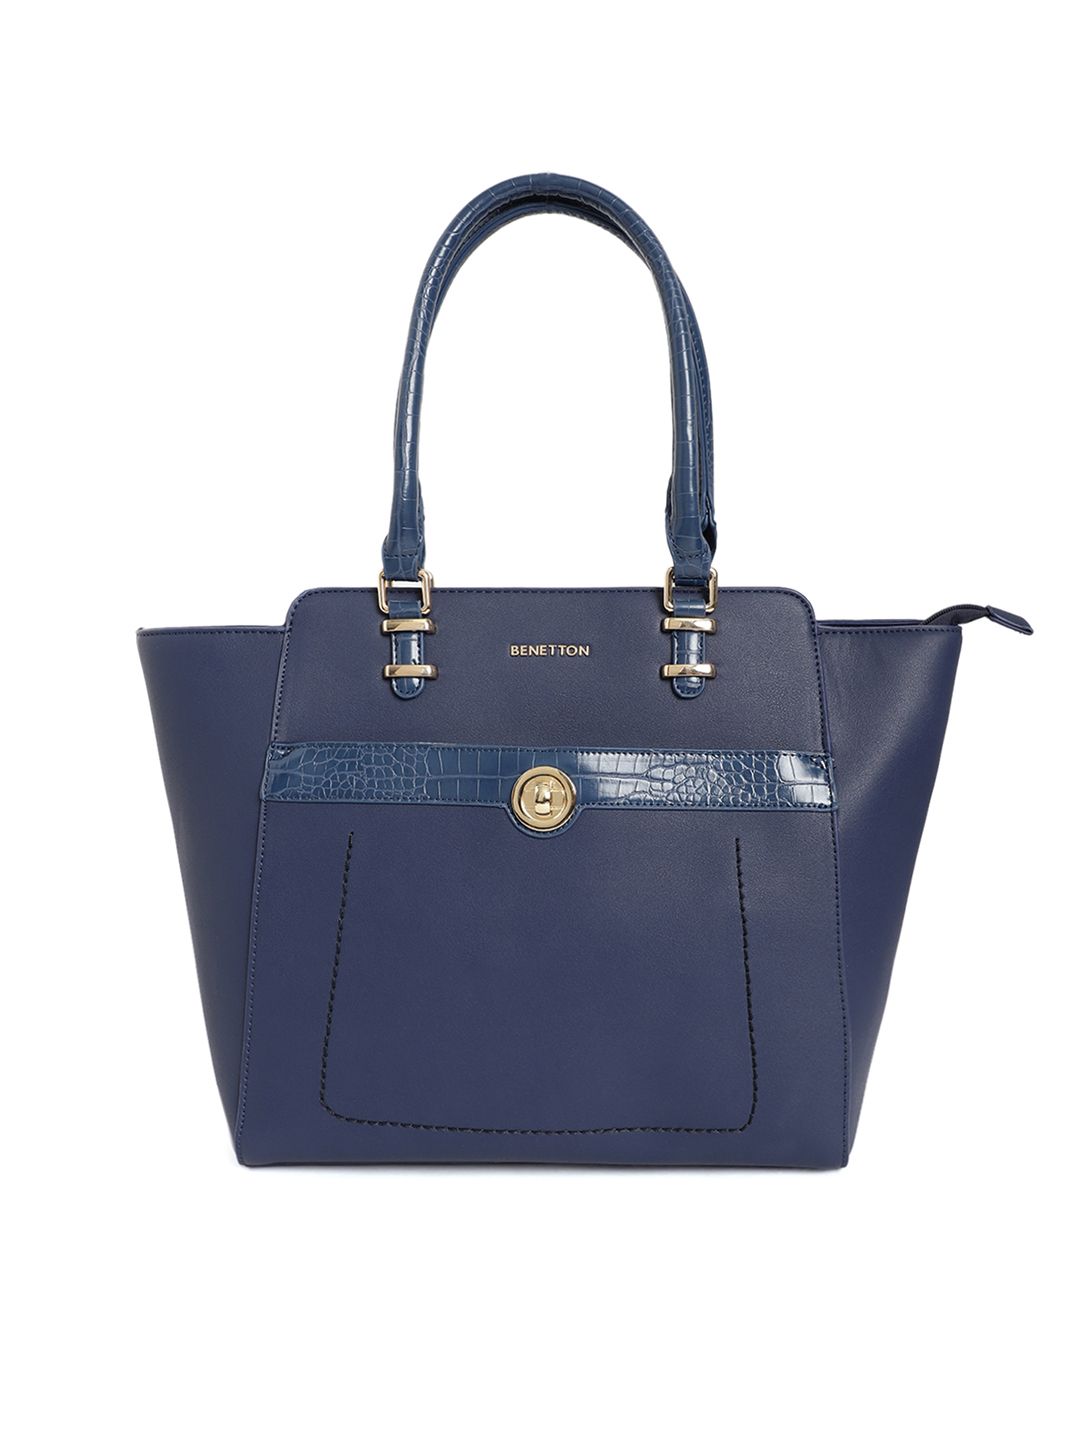 United Colors of Benetton Navy Blue Shoulder Bag Price in India